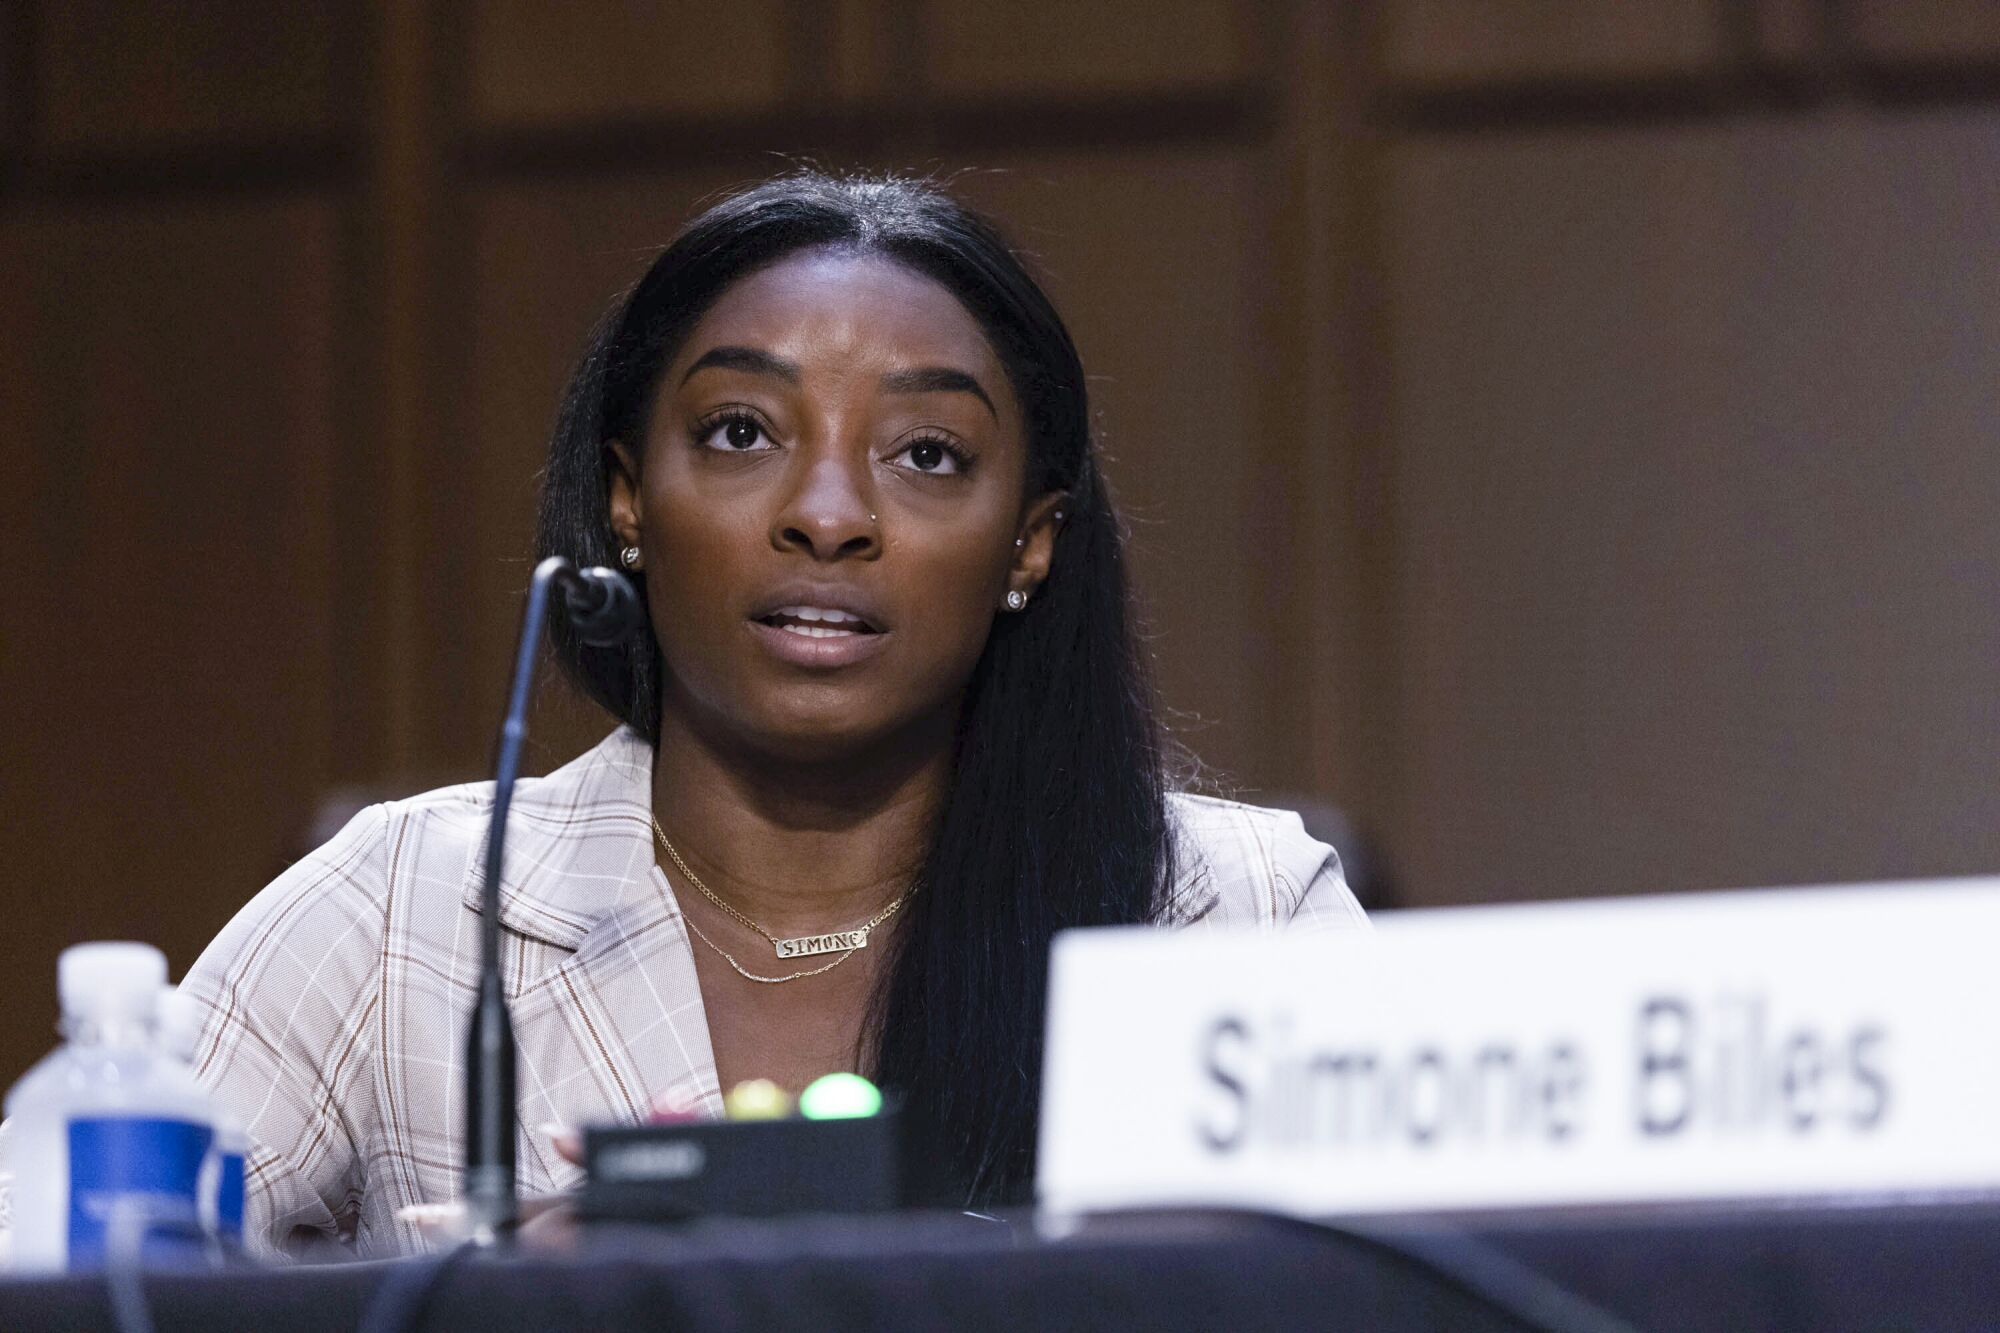 Olympic gymnast Simone Biles testifies on Capitol Hill during a Senate Judiciary hearing.